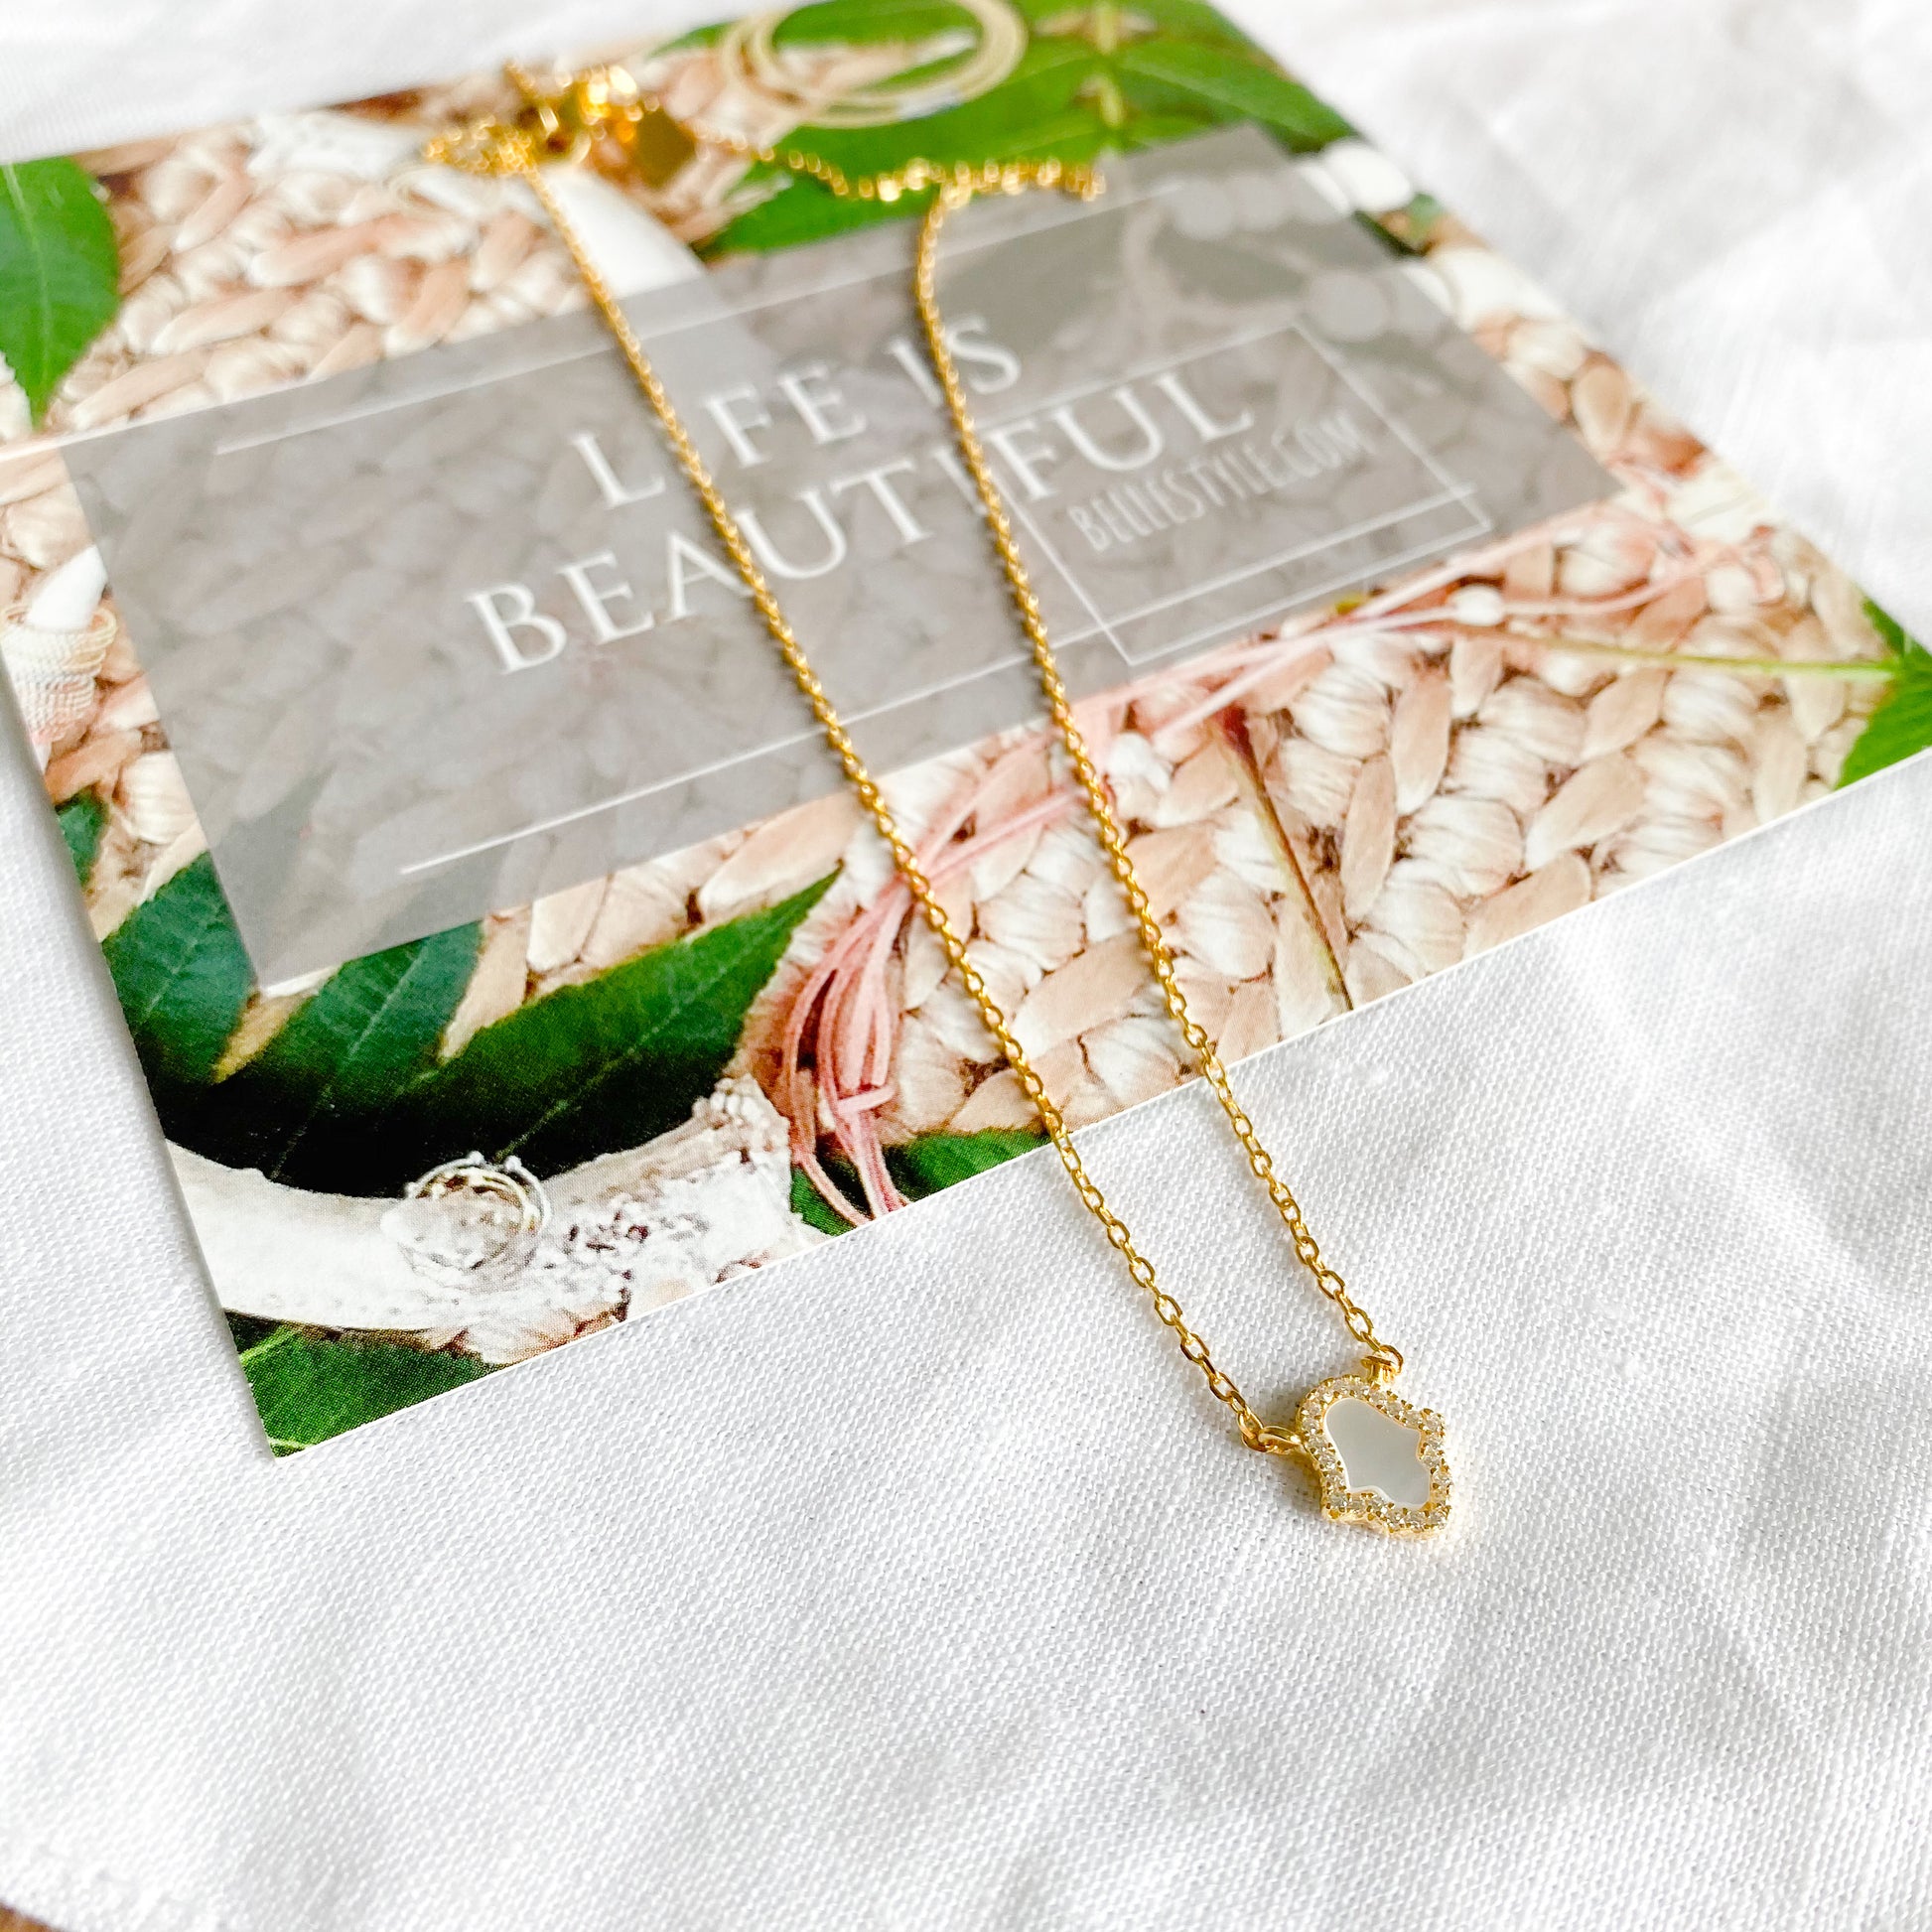 Mother of Pearl Hamsa Necklace - BelleStyle